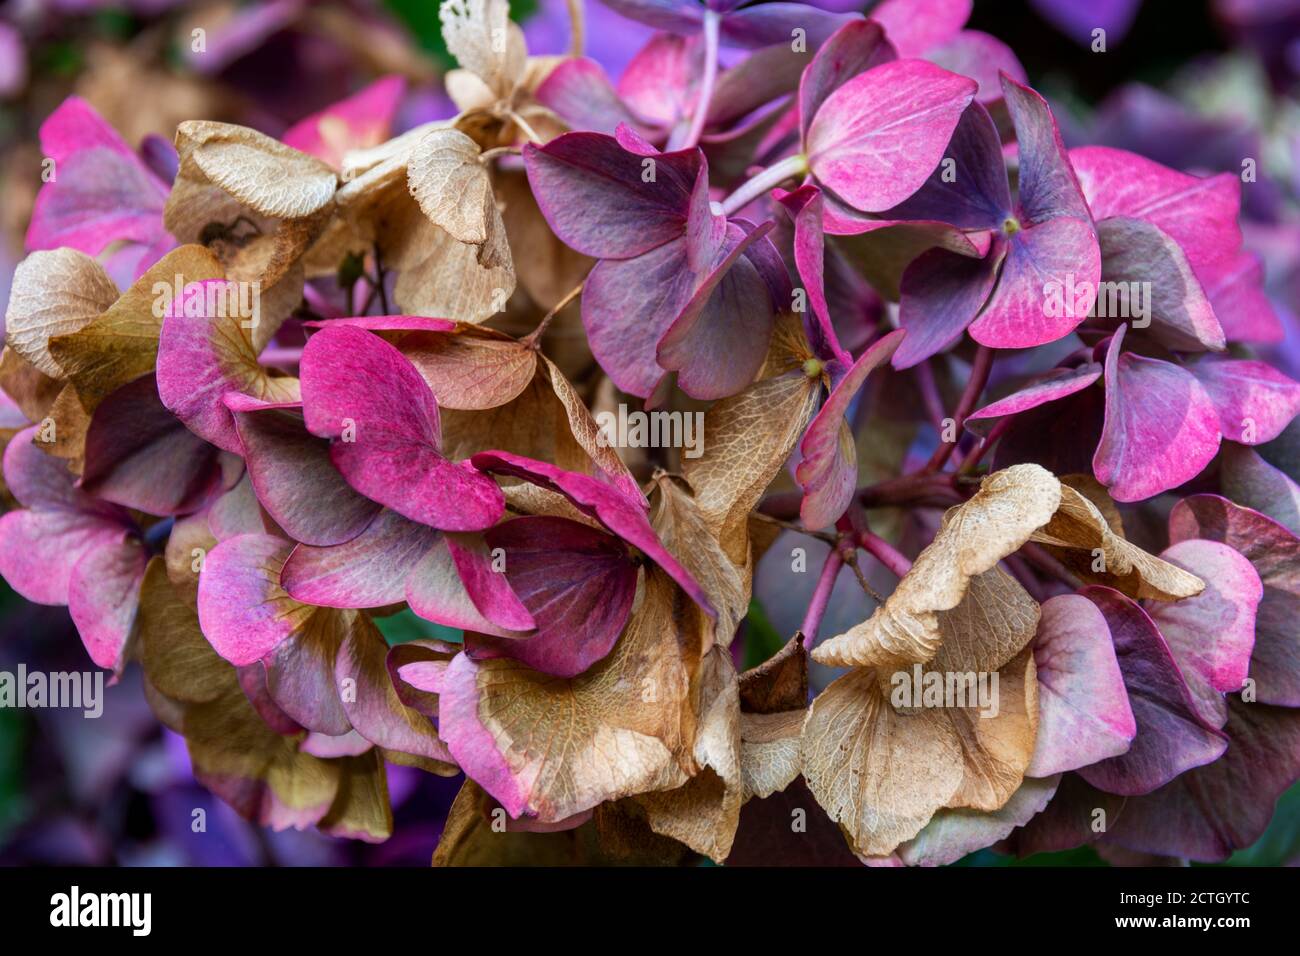 A close up detail of a Hydrangea flower as it matures through the summer season Stock Photo